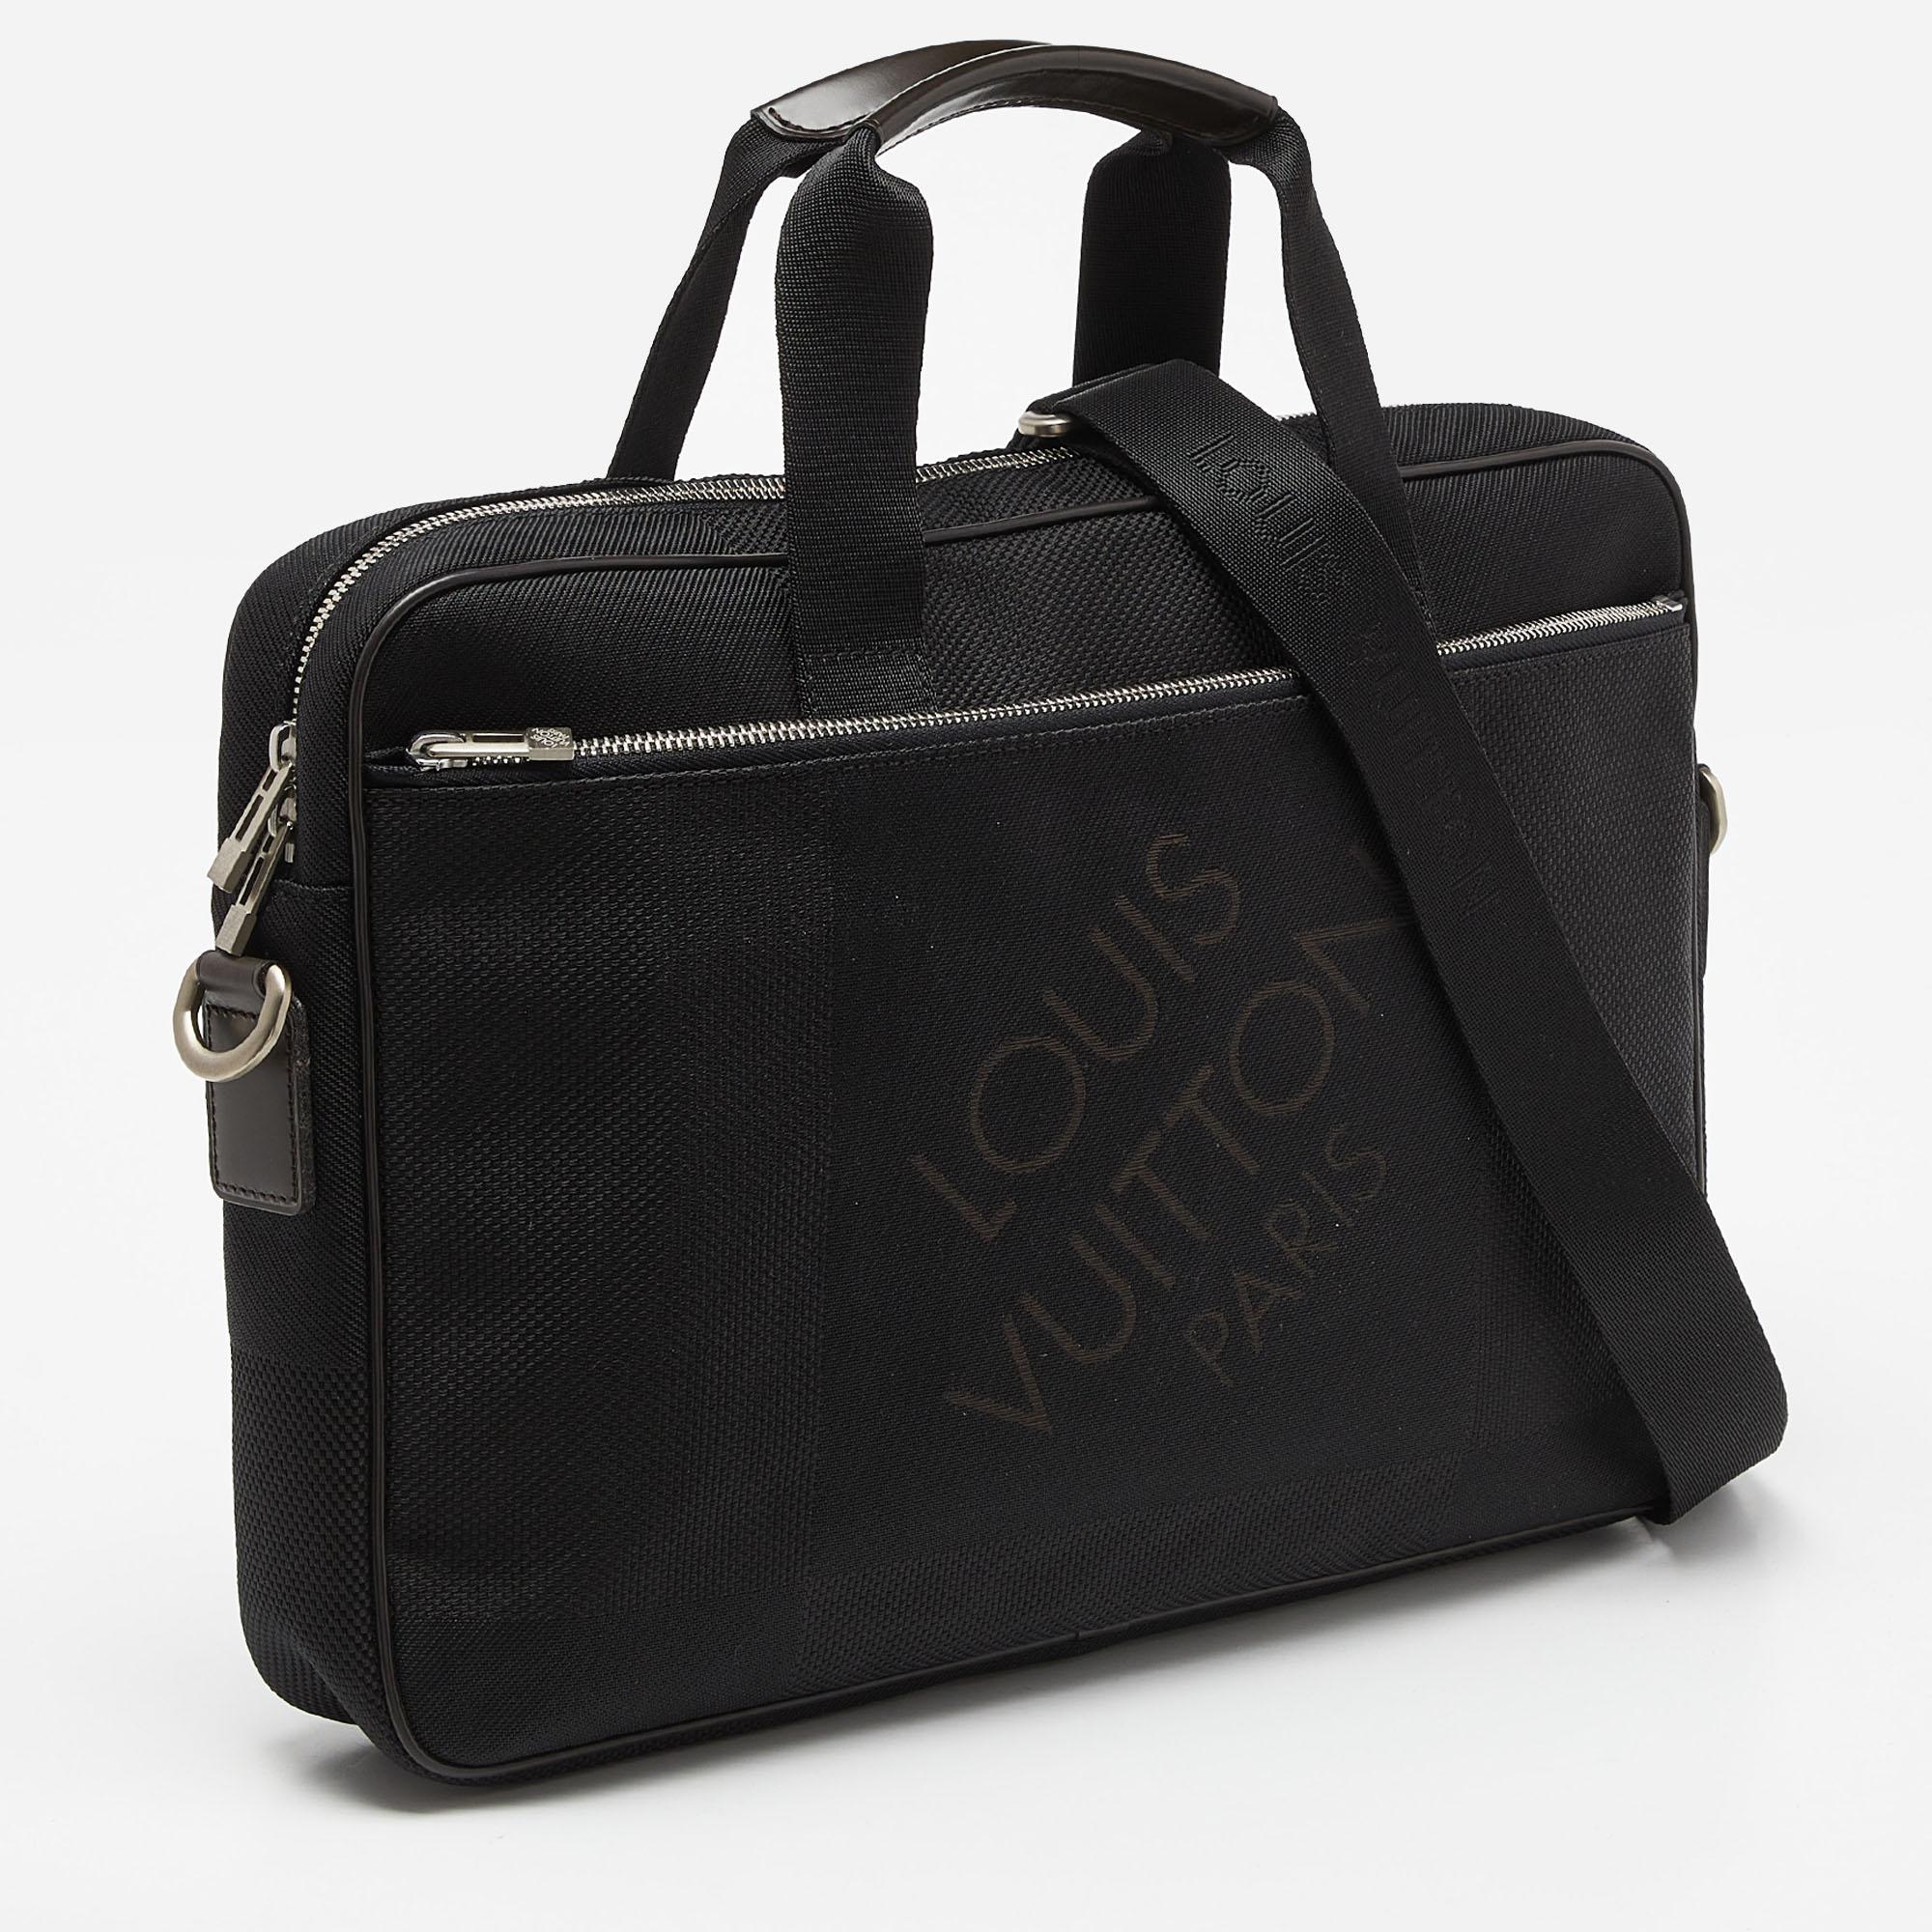 The Louis Vuitton Associe Laptop PM Bag is a sophisticated and functional accessory. Crafted from durable Damier Geant canvas, it features a spacious interior with pockets for efficient organization. The design seamlessly blends luxury and utility,